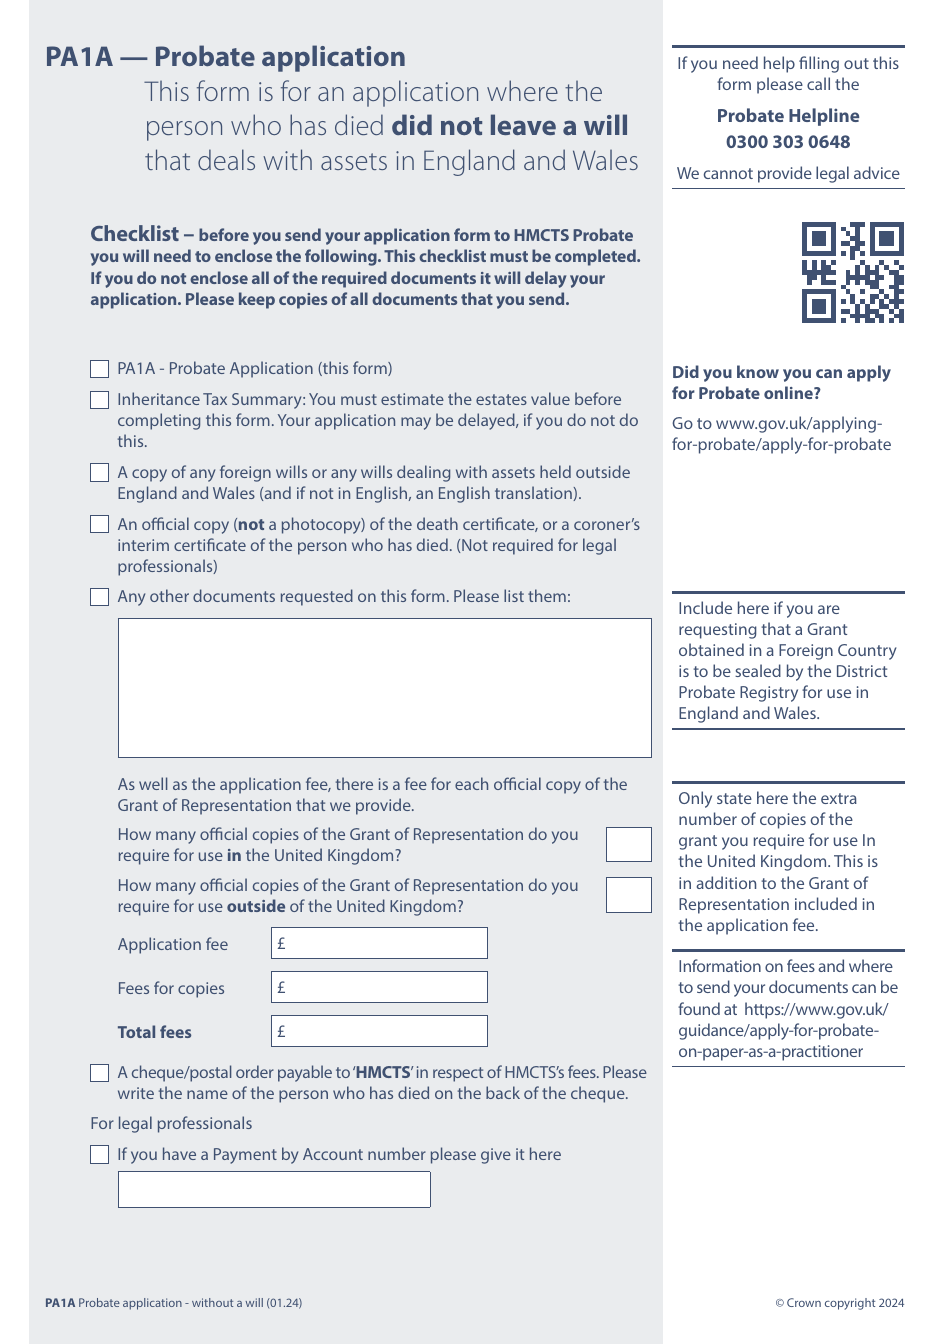 Form PA1A Probate Application - Without a Will - Probate Practitioners - United Kingdom, Page 1